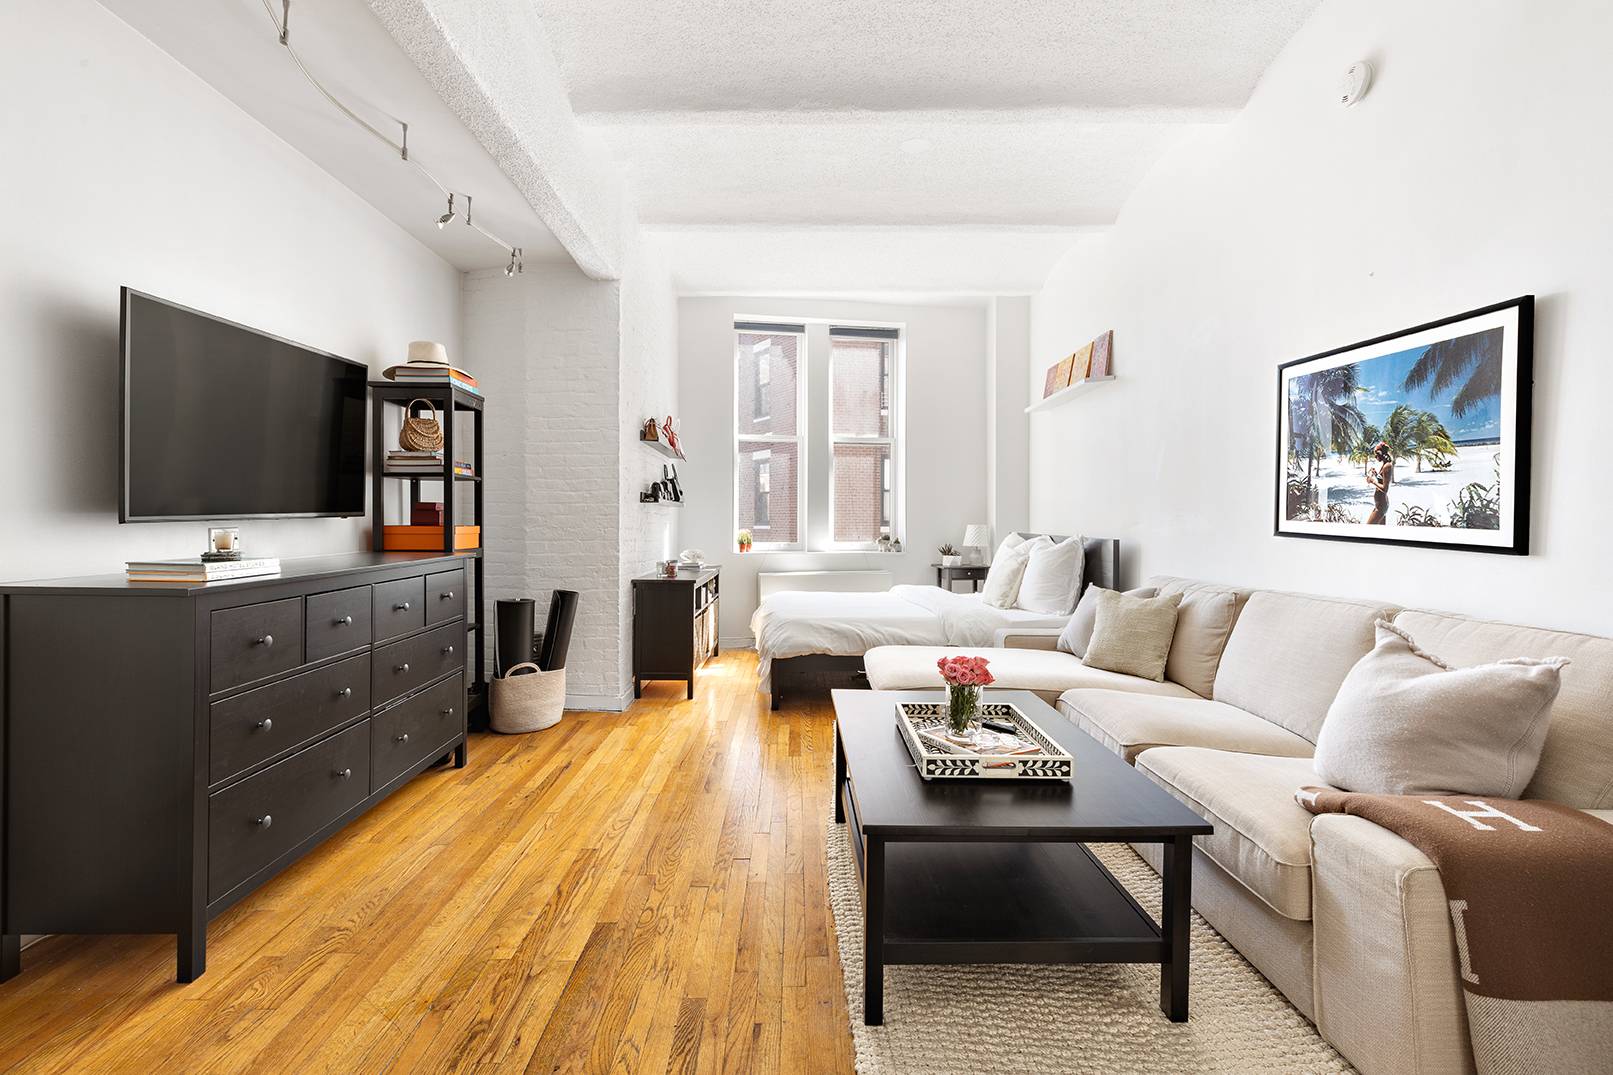 Welcome home to apartment 5G at the Hallanan, a renovated and bright loft like studio in prime West Village.